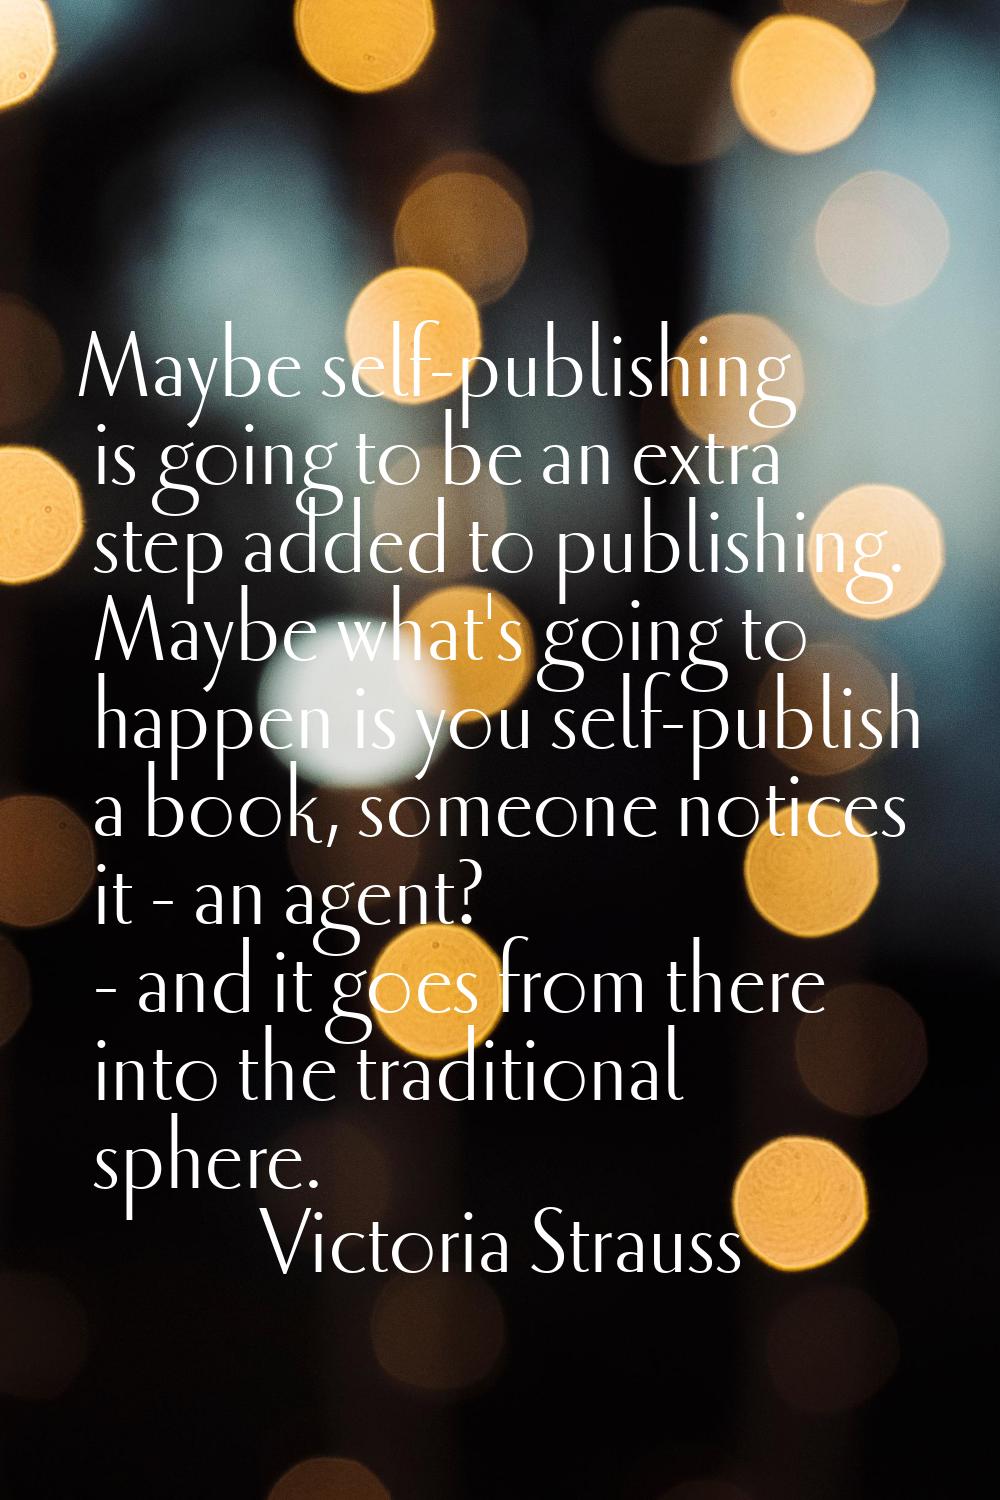 Maybe self-publishing is going to be an extra step added to publishing. Maybe what's going to happe